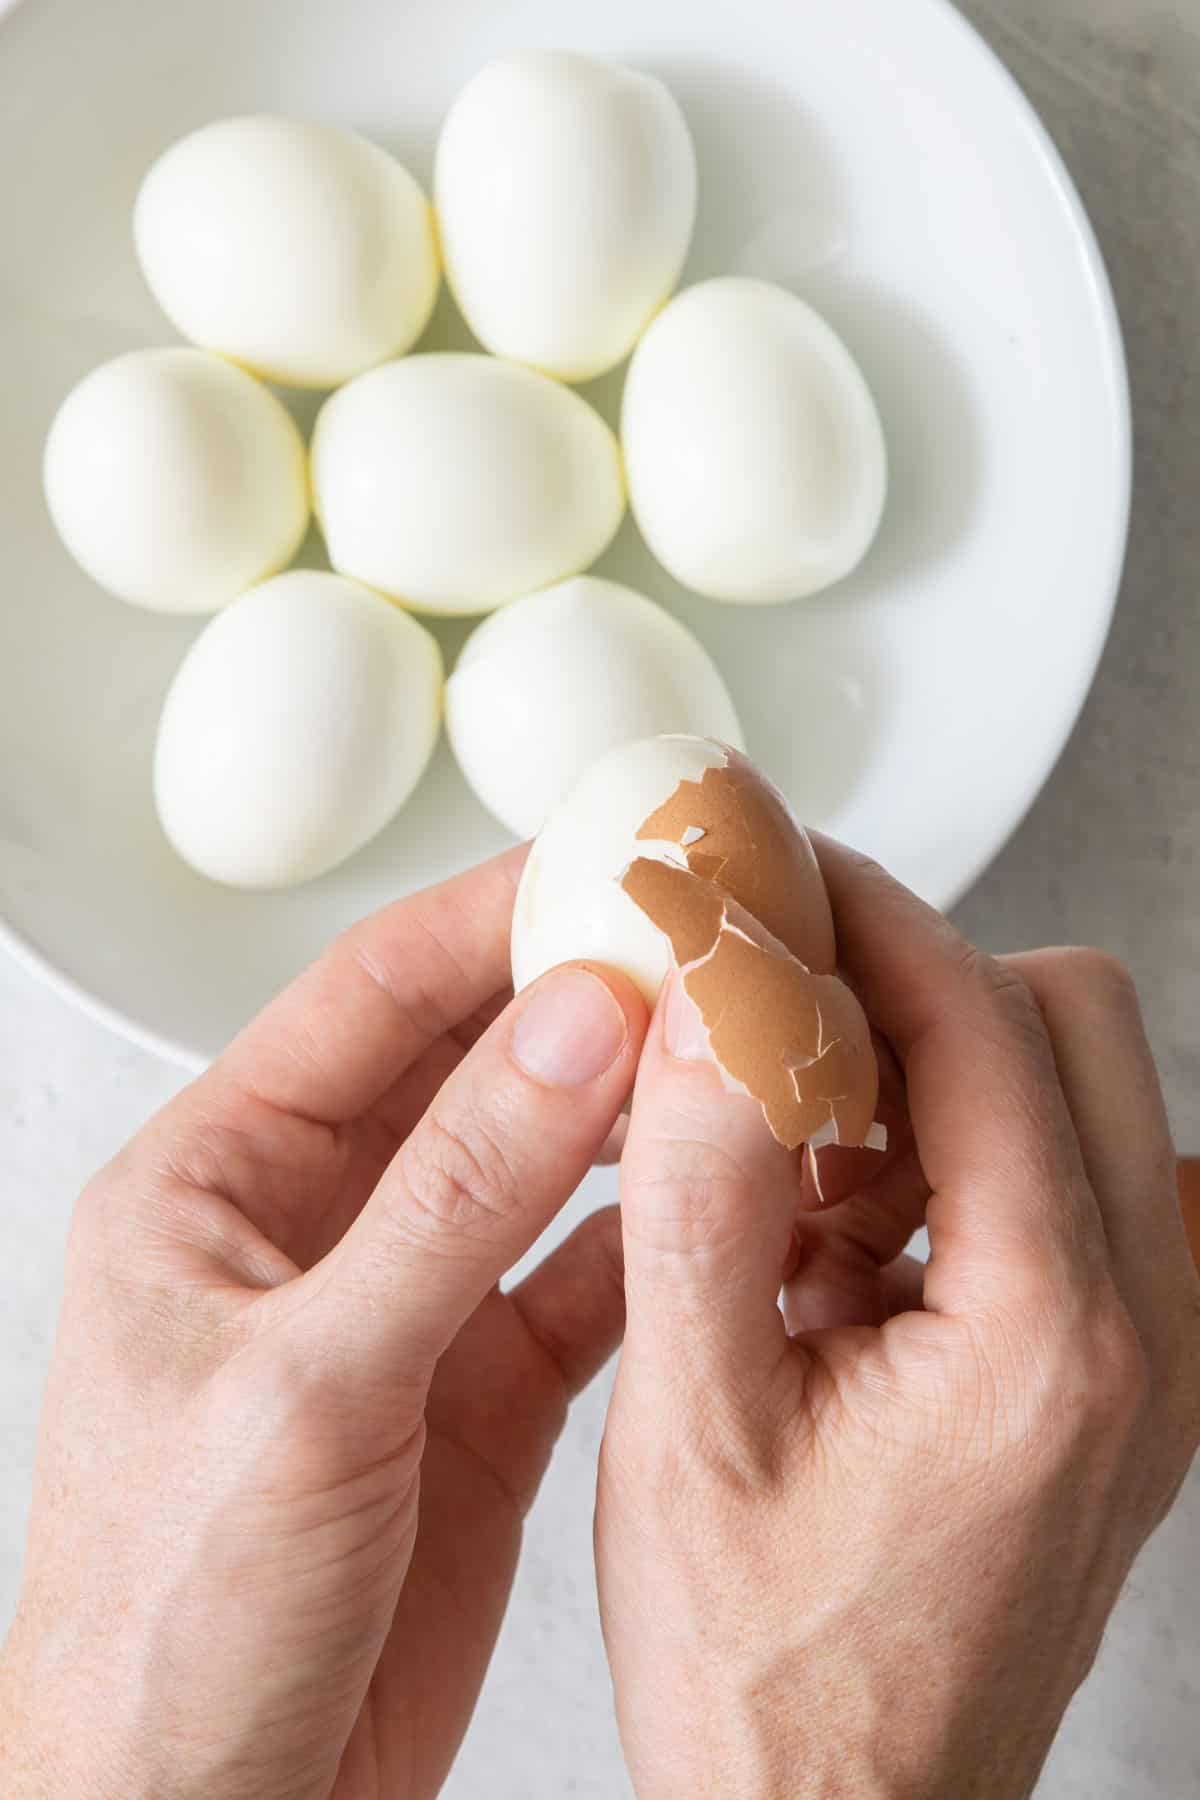 Hands peeling a brown egg with a plate of peeled eggs below.